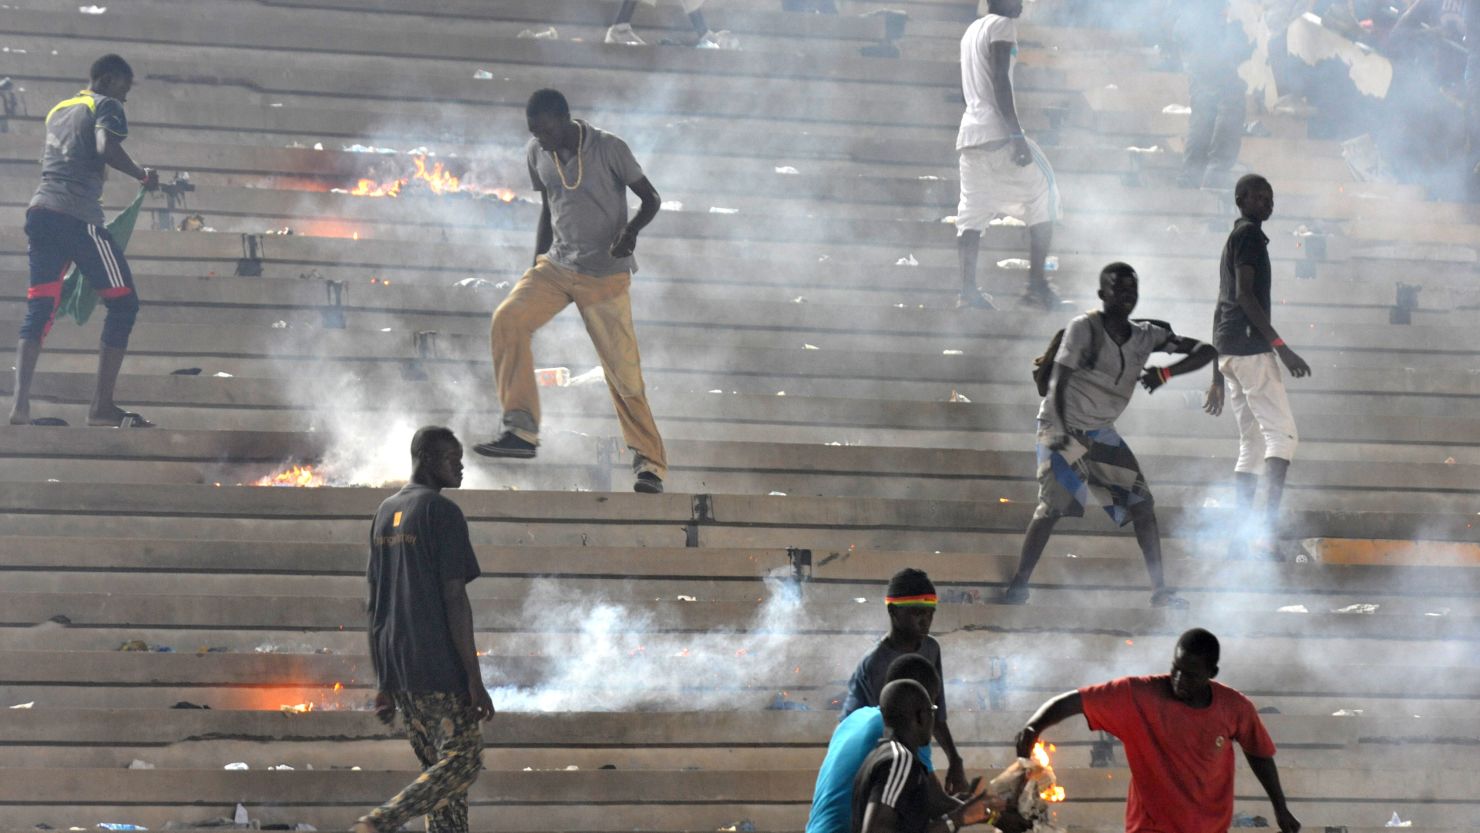 Fans set fire to the stands in Dakar on Saturday, as Ivory Coast's second goal effectively eliminated the hosts from the 2013 Africa Cup of Nations, with the Confederation of African Football disqualifying Senegal from the tournament on Tuesday. 